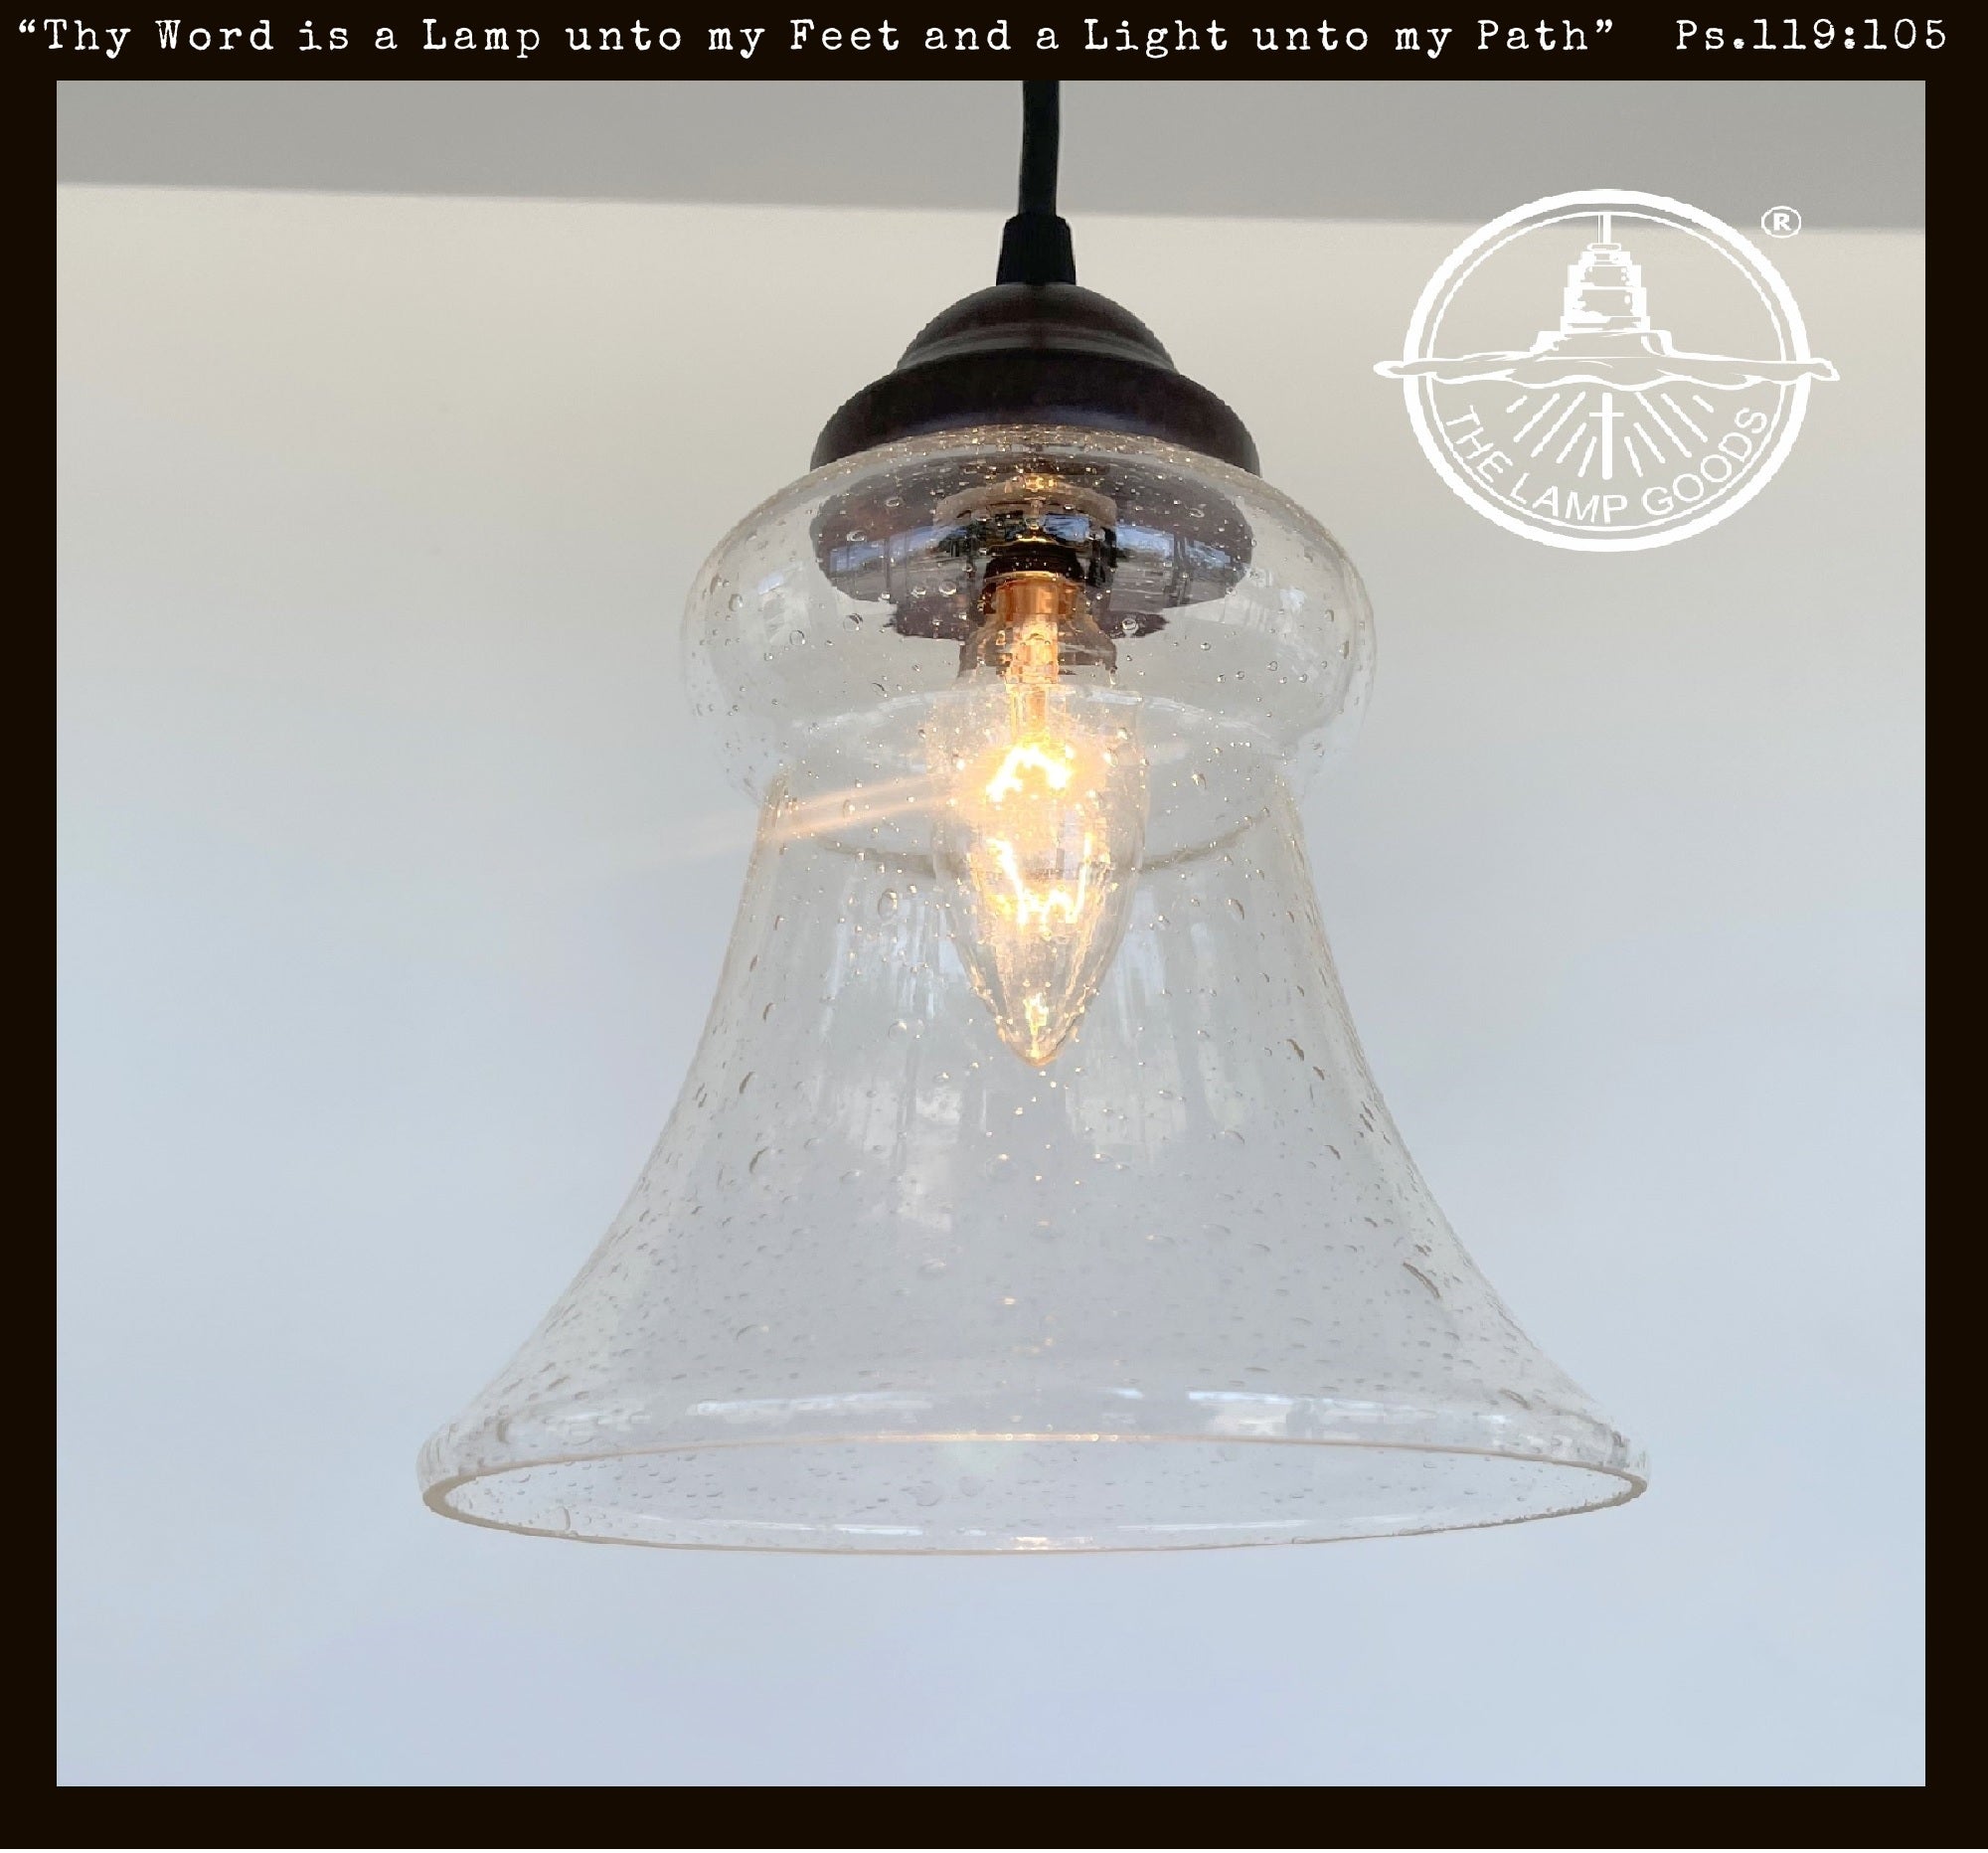 Antique Seeded Clear Glass Pendant Light